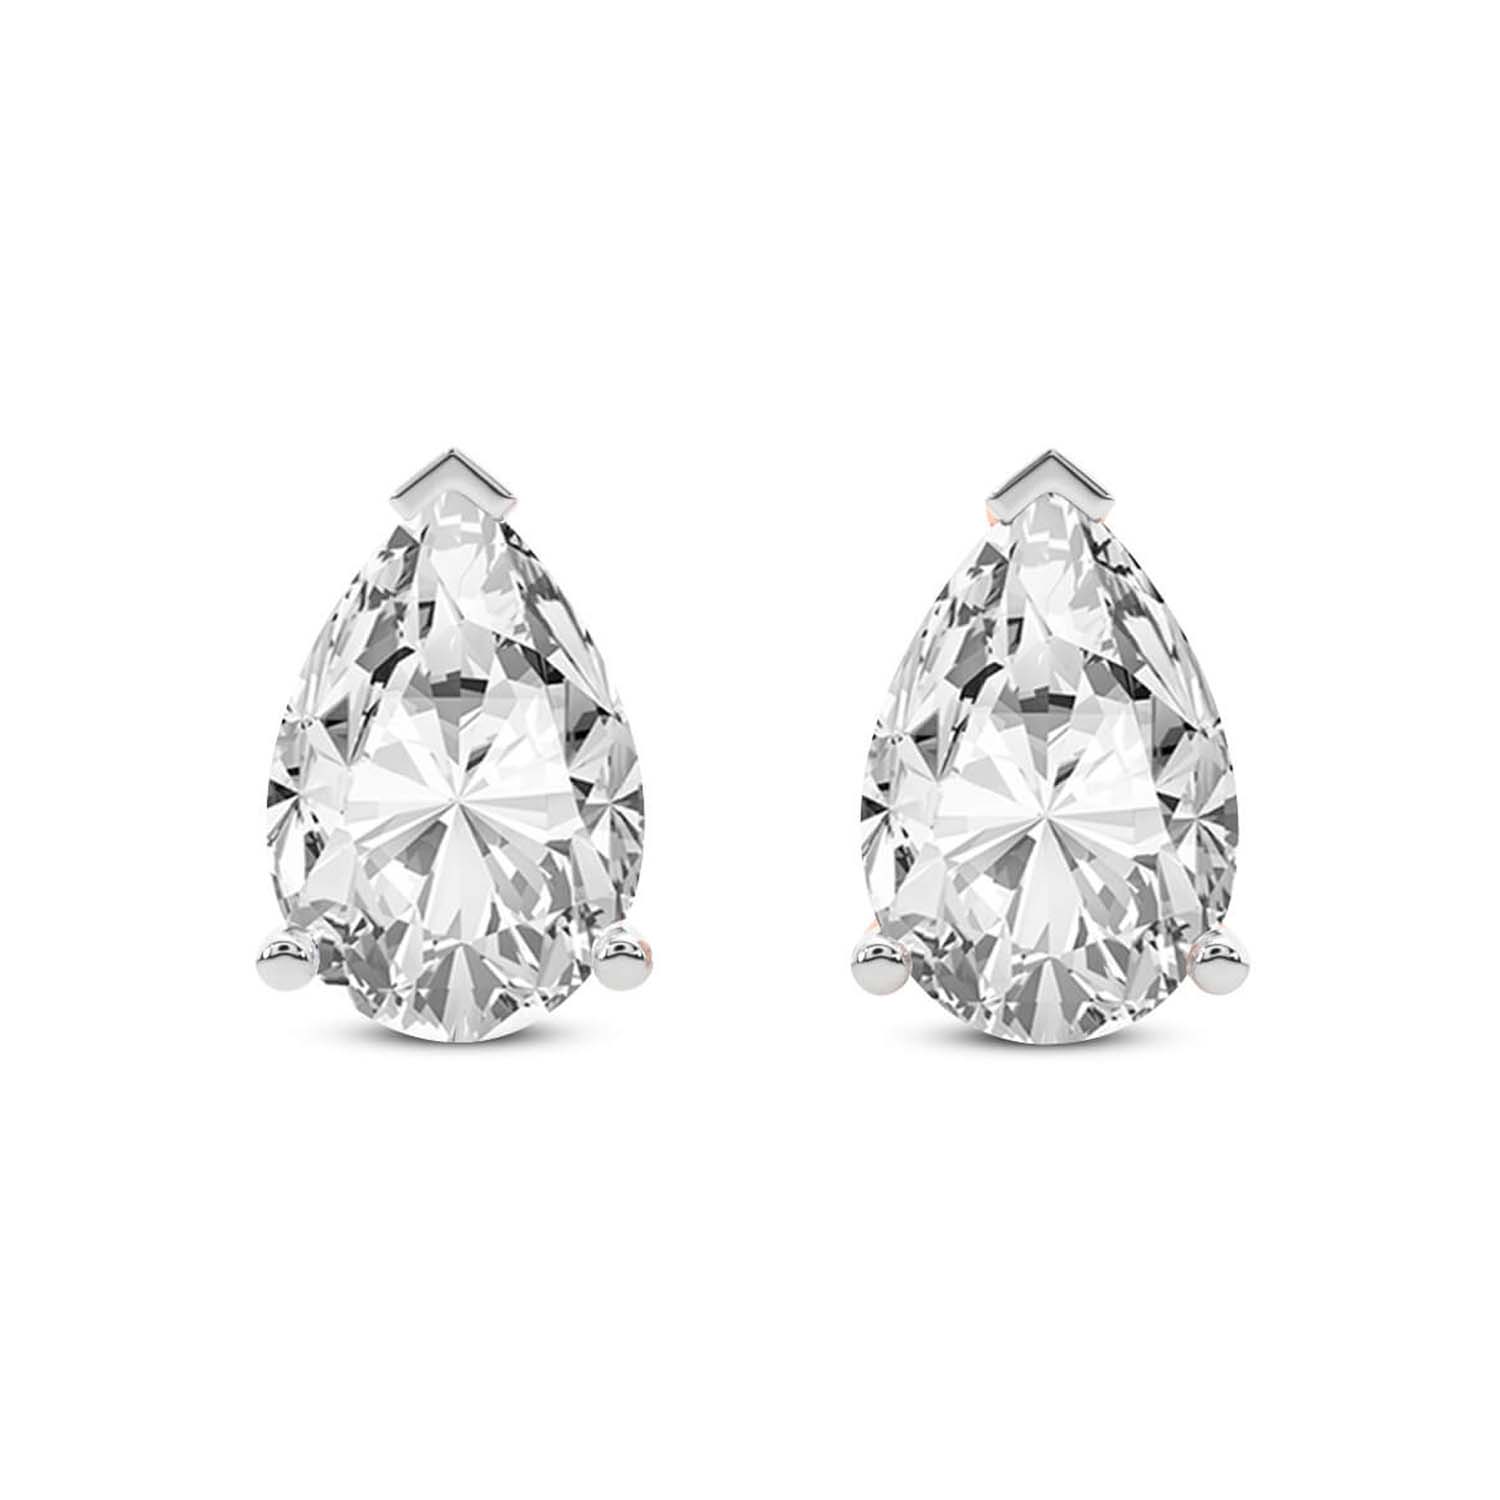 3 Prong Pear Lab Diamond Stud Earrings white gold earring, small front view